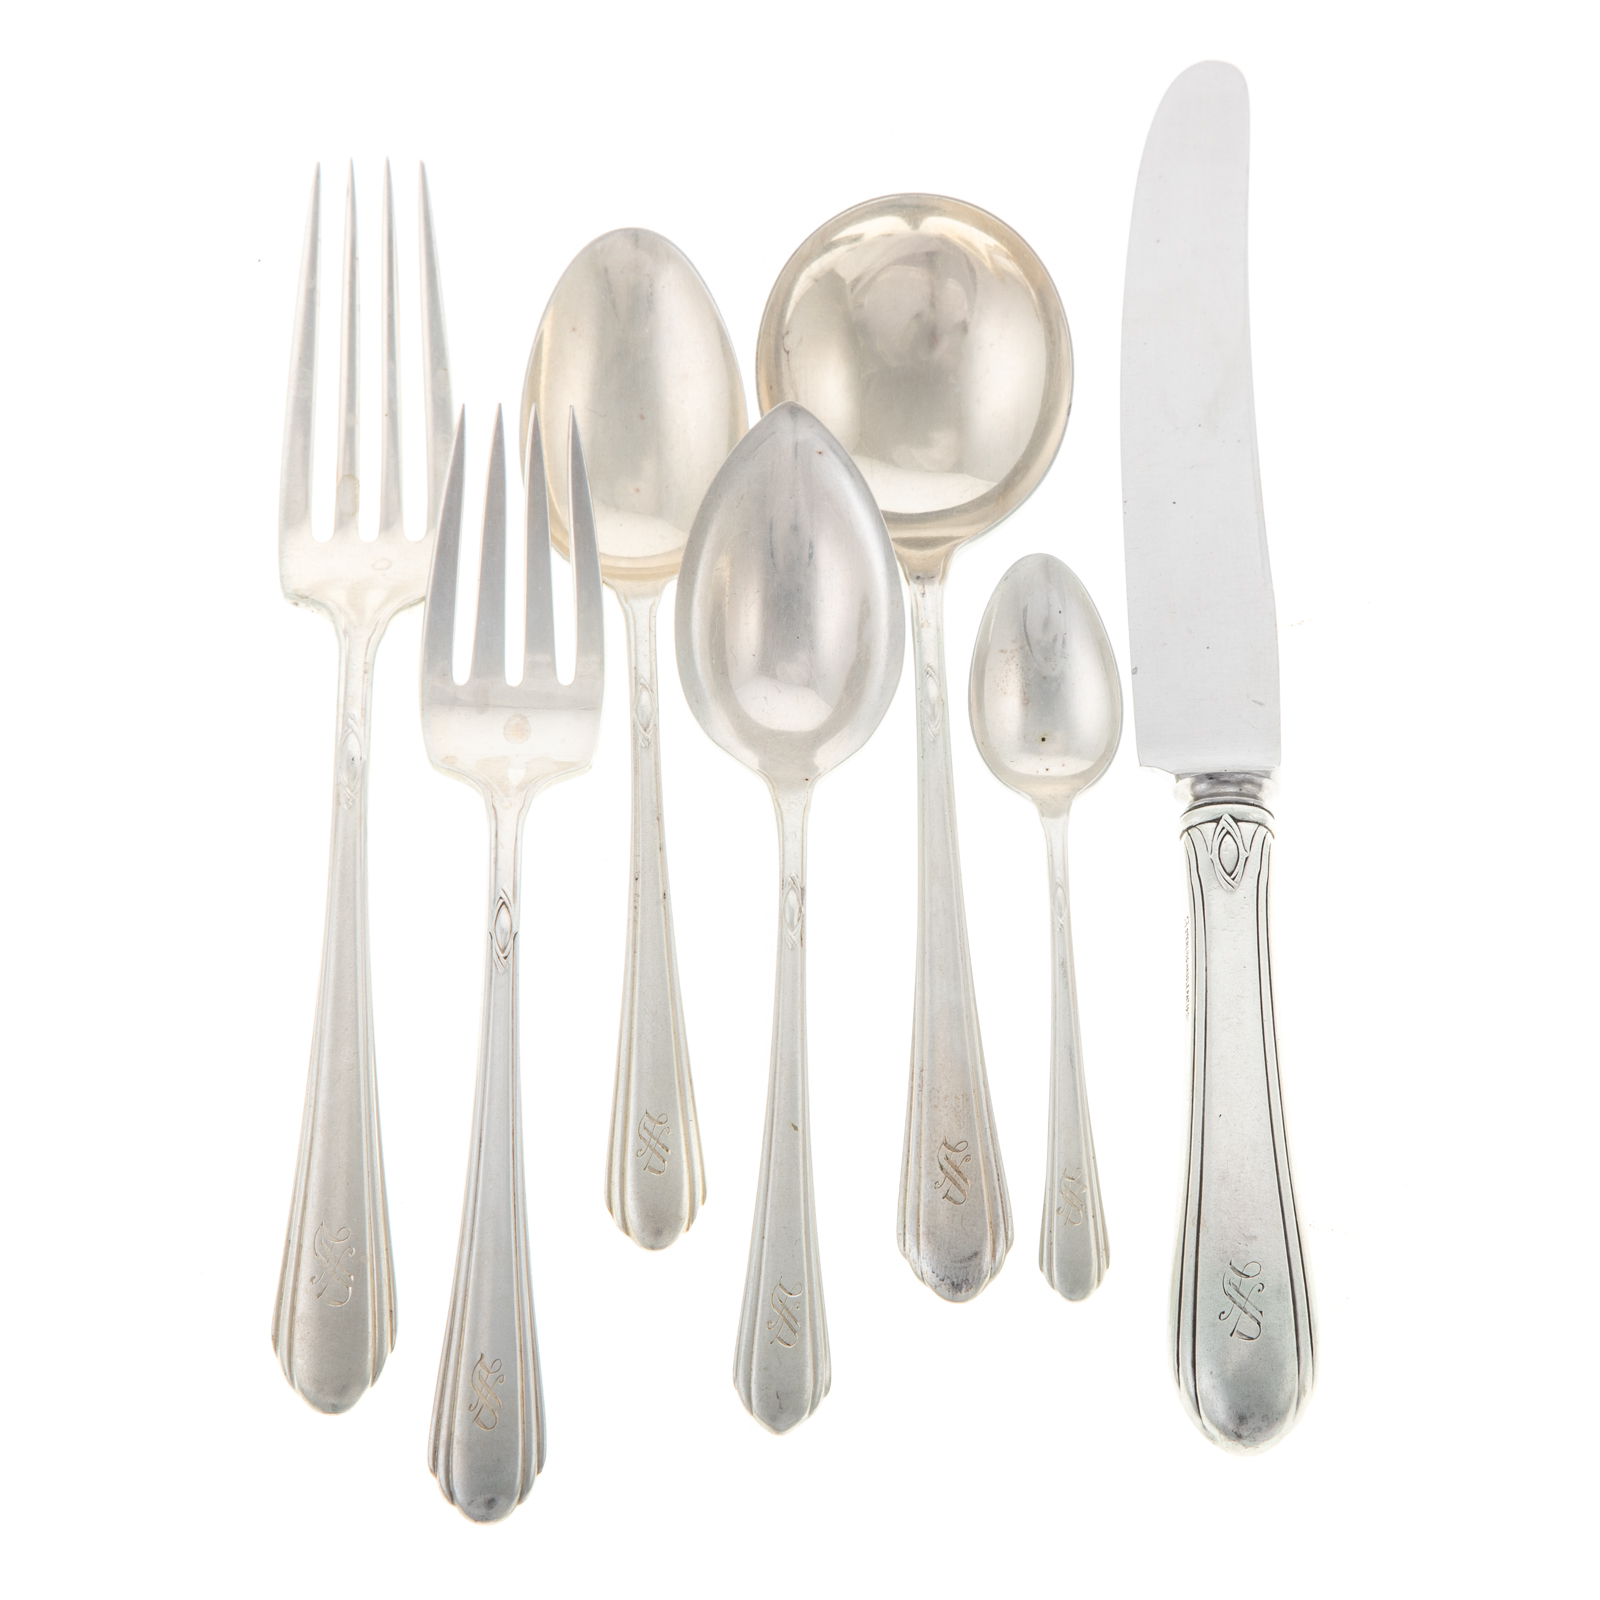 TOWLE STERLING "LADY DIANA" FLATWARE